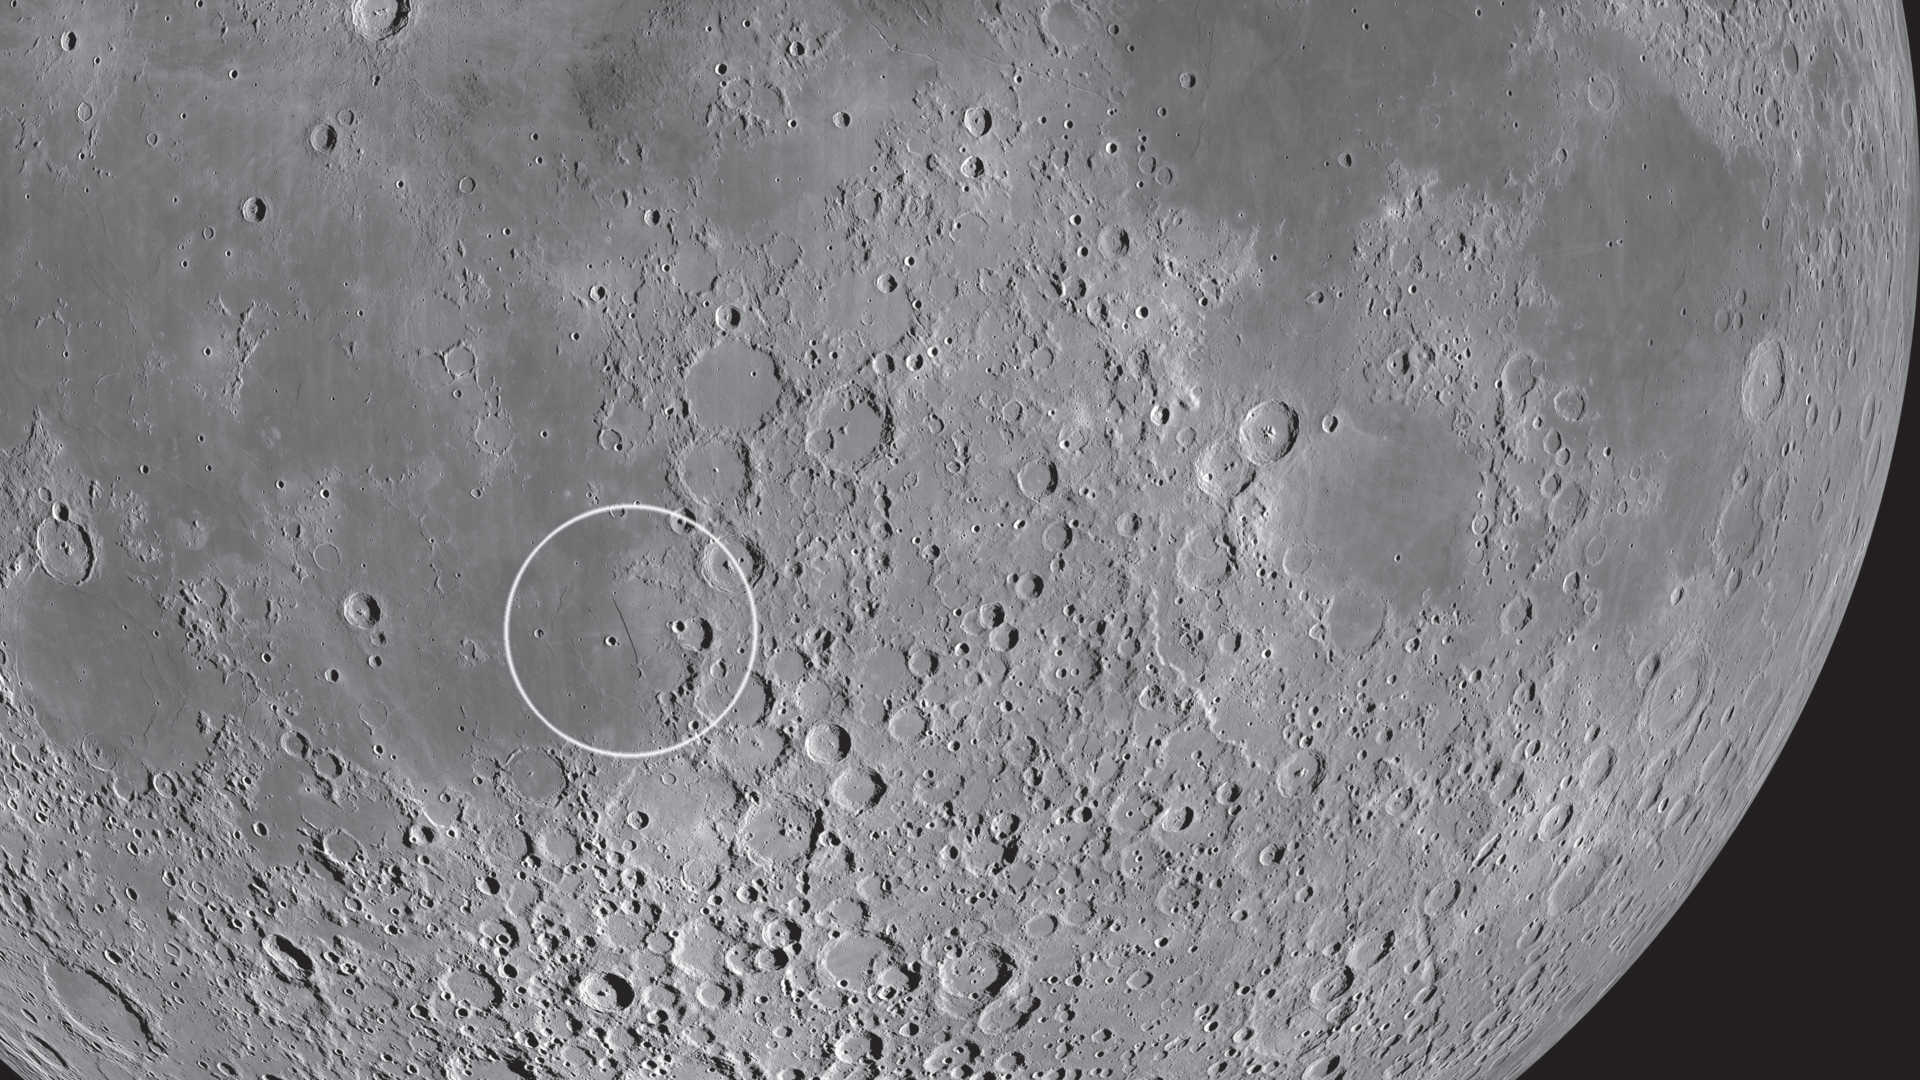 Rupes Recta and a sword on the Moon